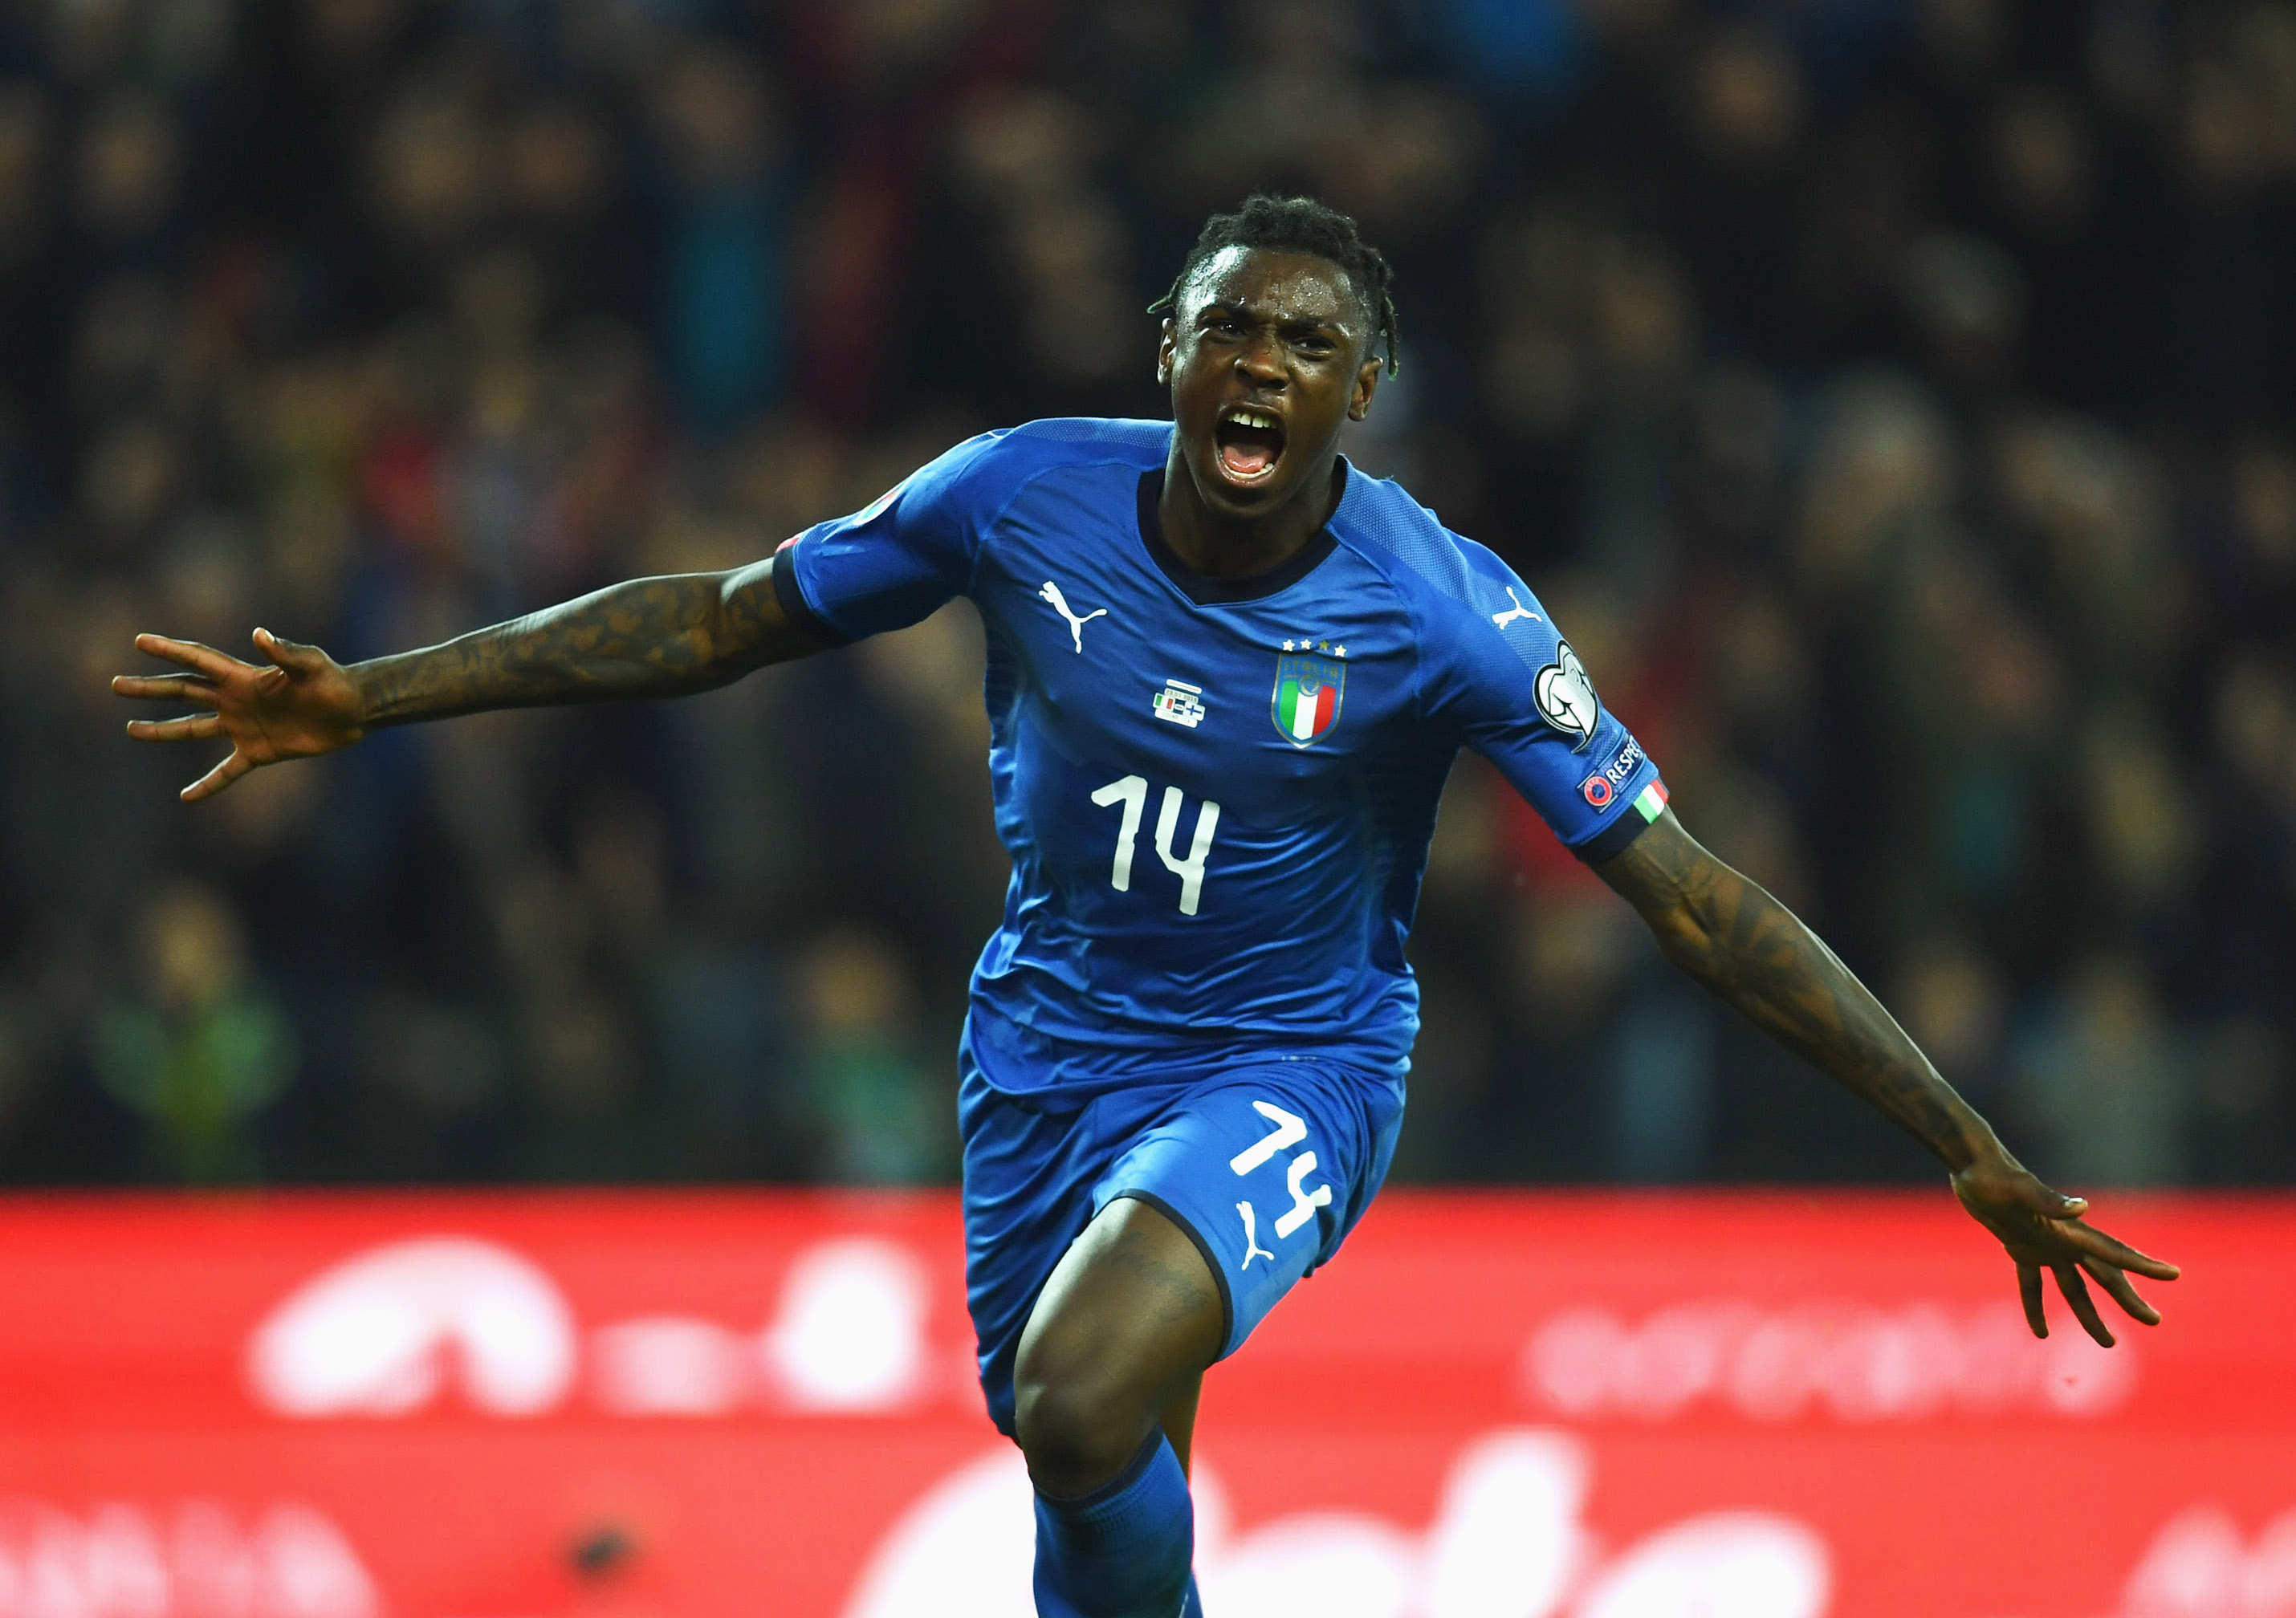 UDINE, ITALY - MARCH 23:  Moise Kean of Italy celebrates after scoring the second goal during the 2020 UEFA European Championships group J qualifying match between Italy and Finland at Stadio Friuli on March 23, 2019 in Udine, Italy.  (Photo by Claudio Villa/Getty Images)